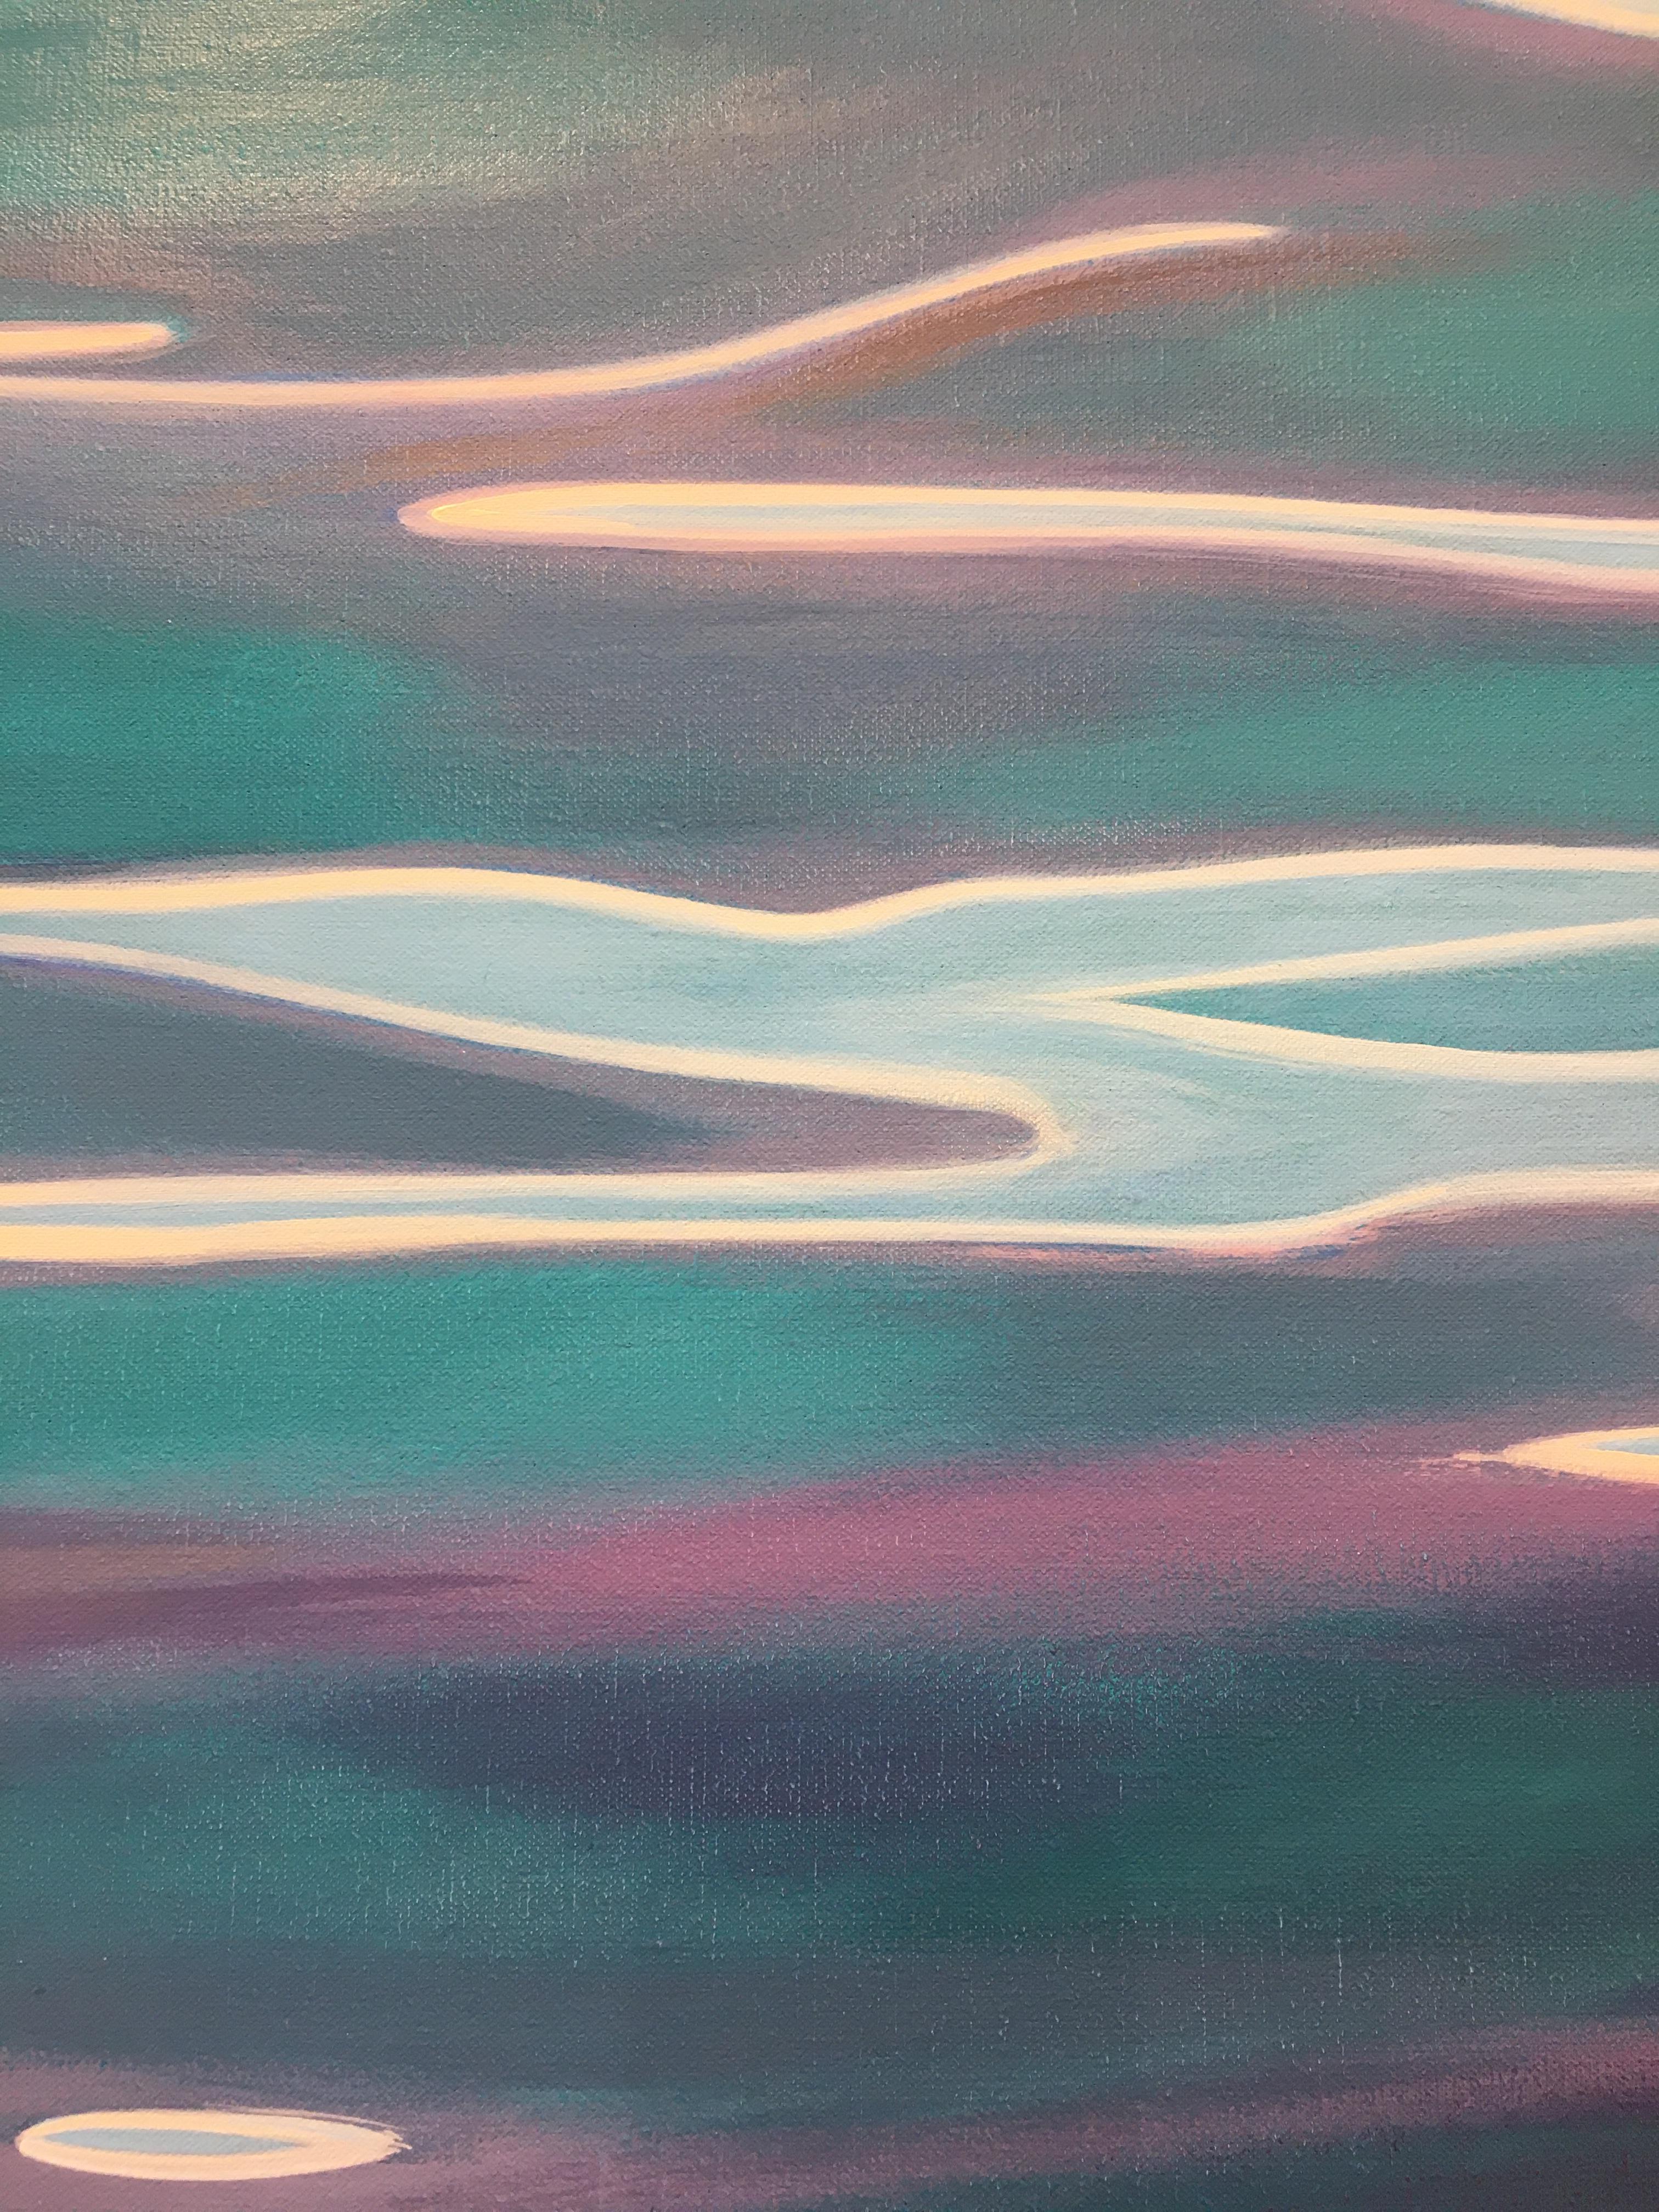 Antarctica II, Danielle Eubank, oil on linen, abstract, waterscape For Sale 3